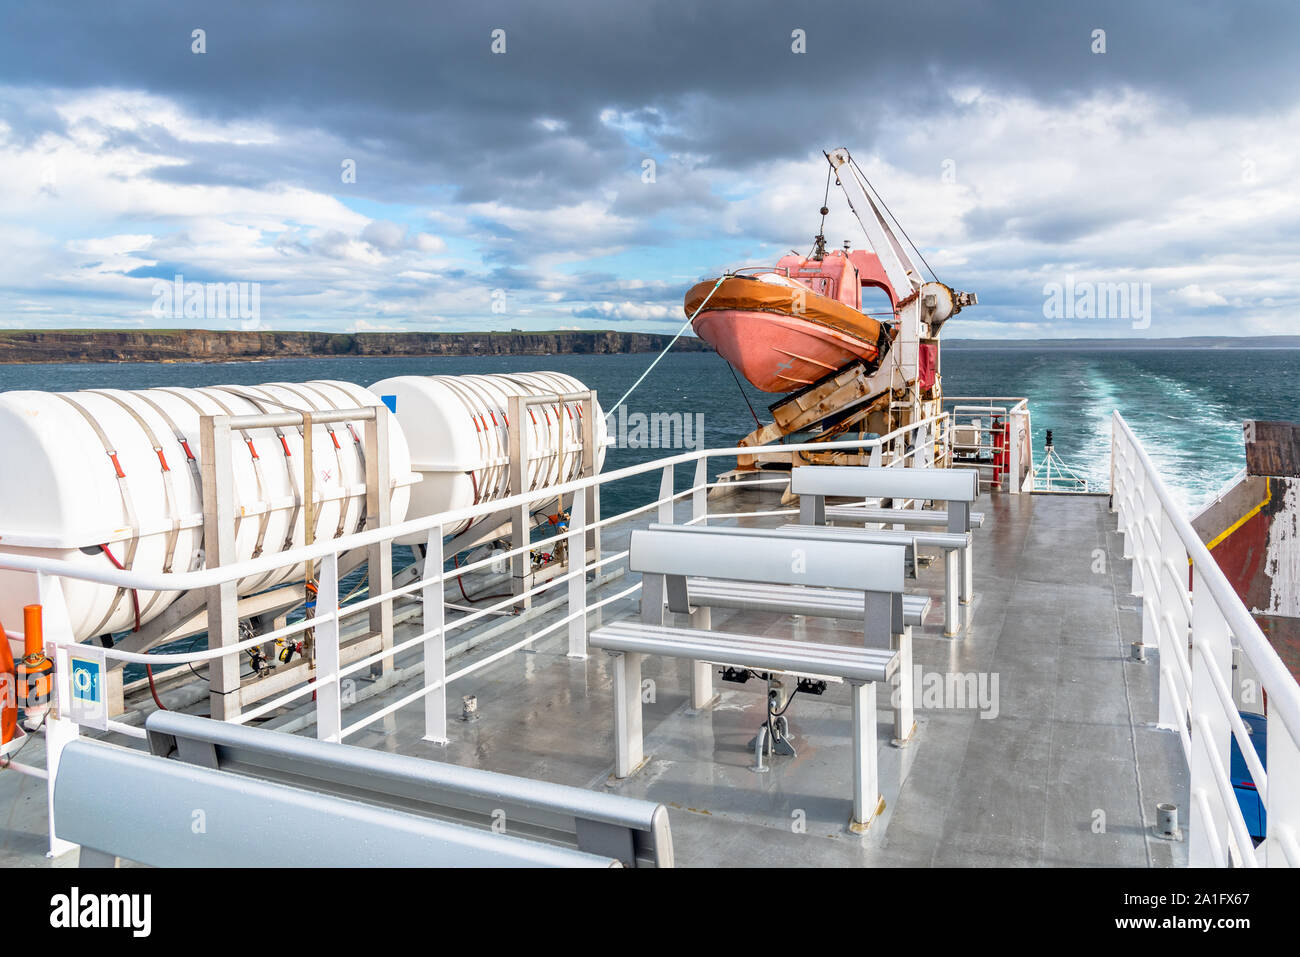 Deserted upper deck of a ferry boat in navigation with a lifeboat and other safety equipment Stock Photo